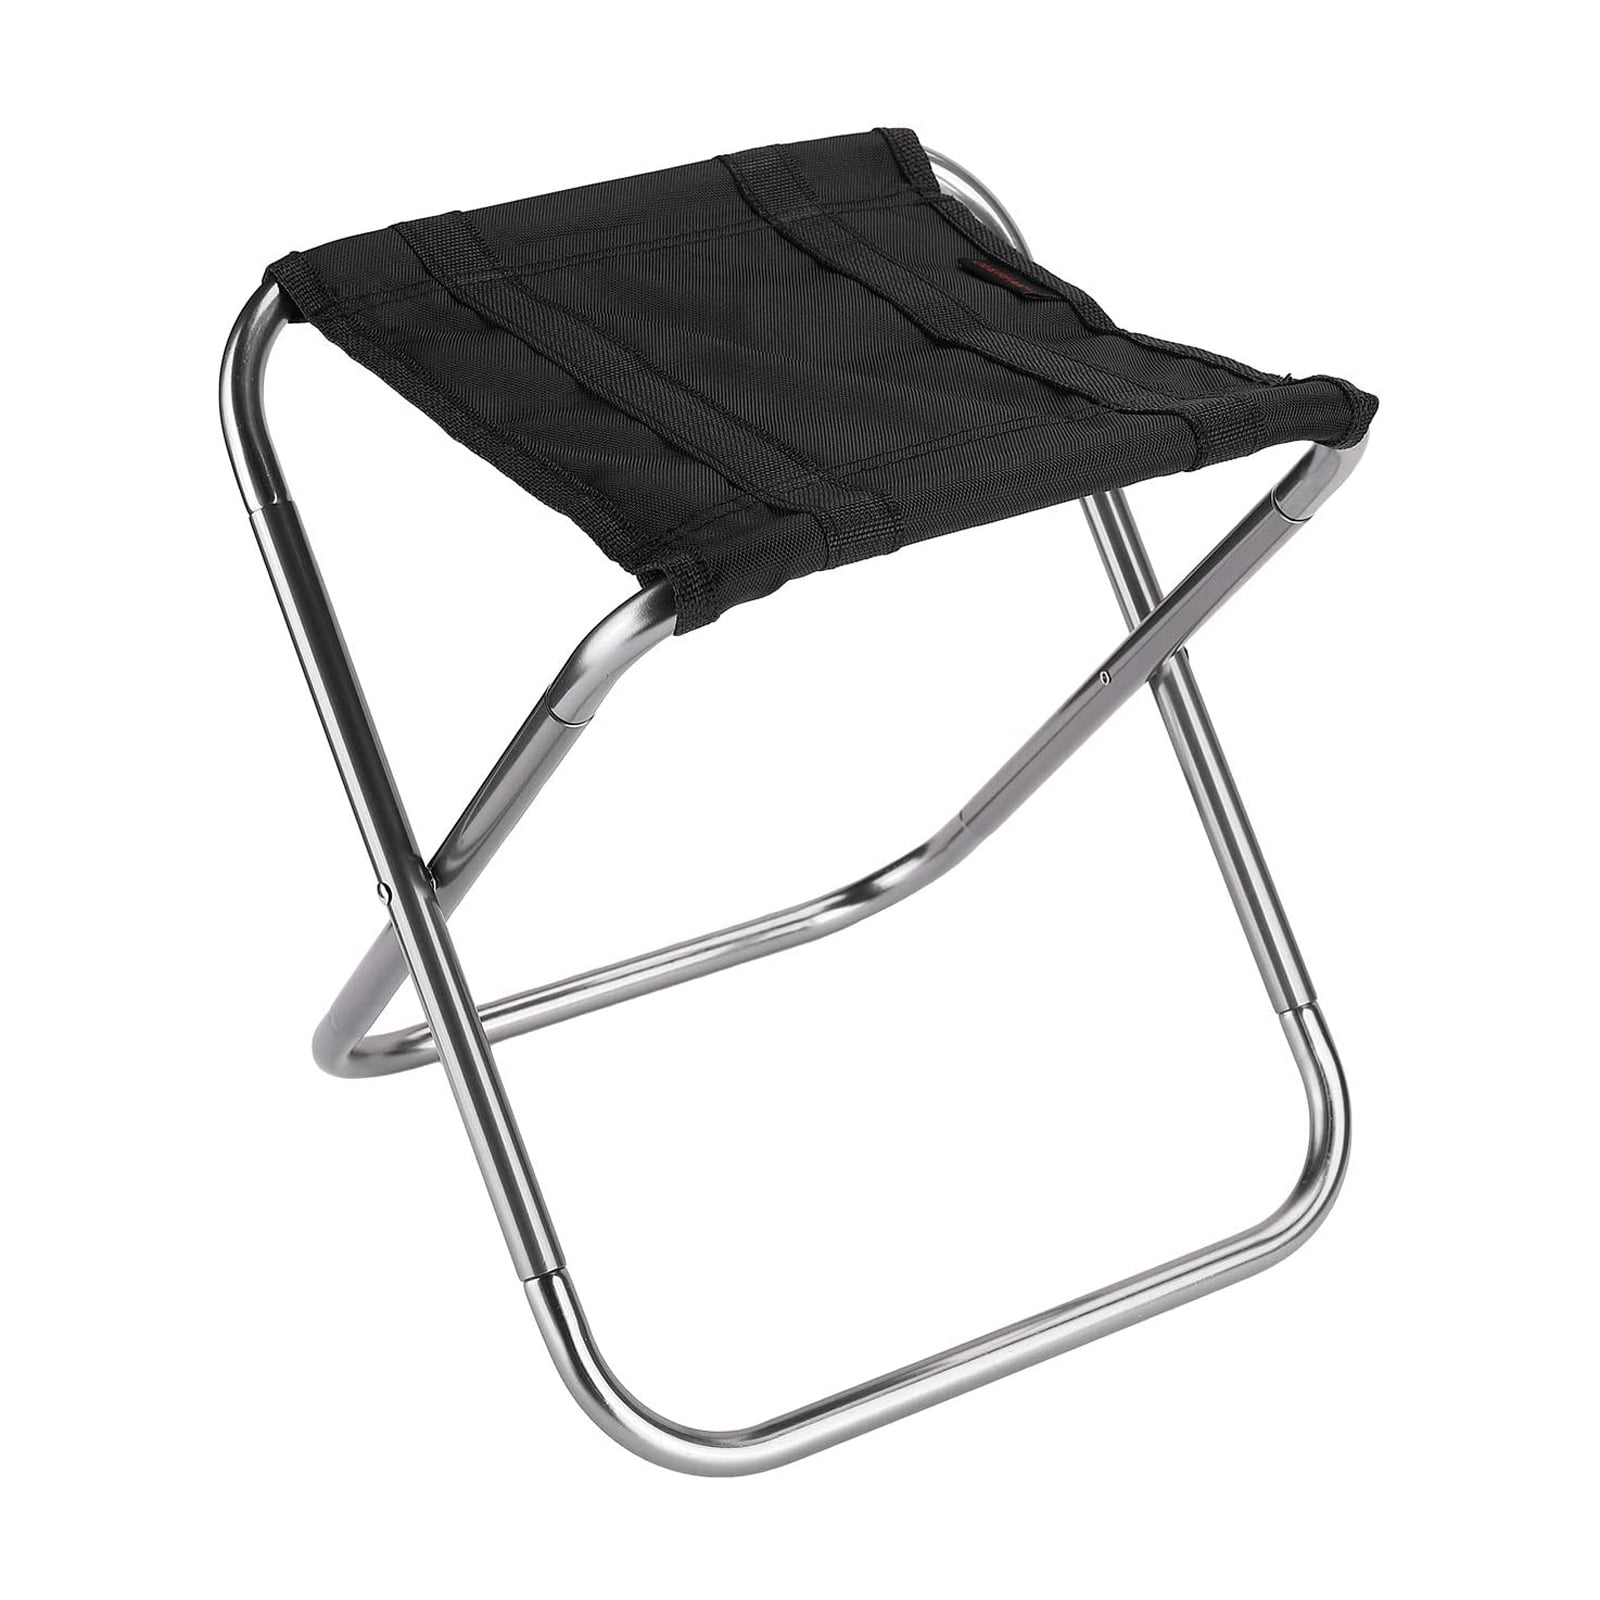 Details about   Folding Fishing Chair Lightweight Picnic Camping Chair Foldable Aluminium Cloth 